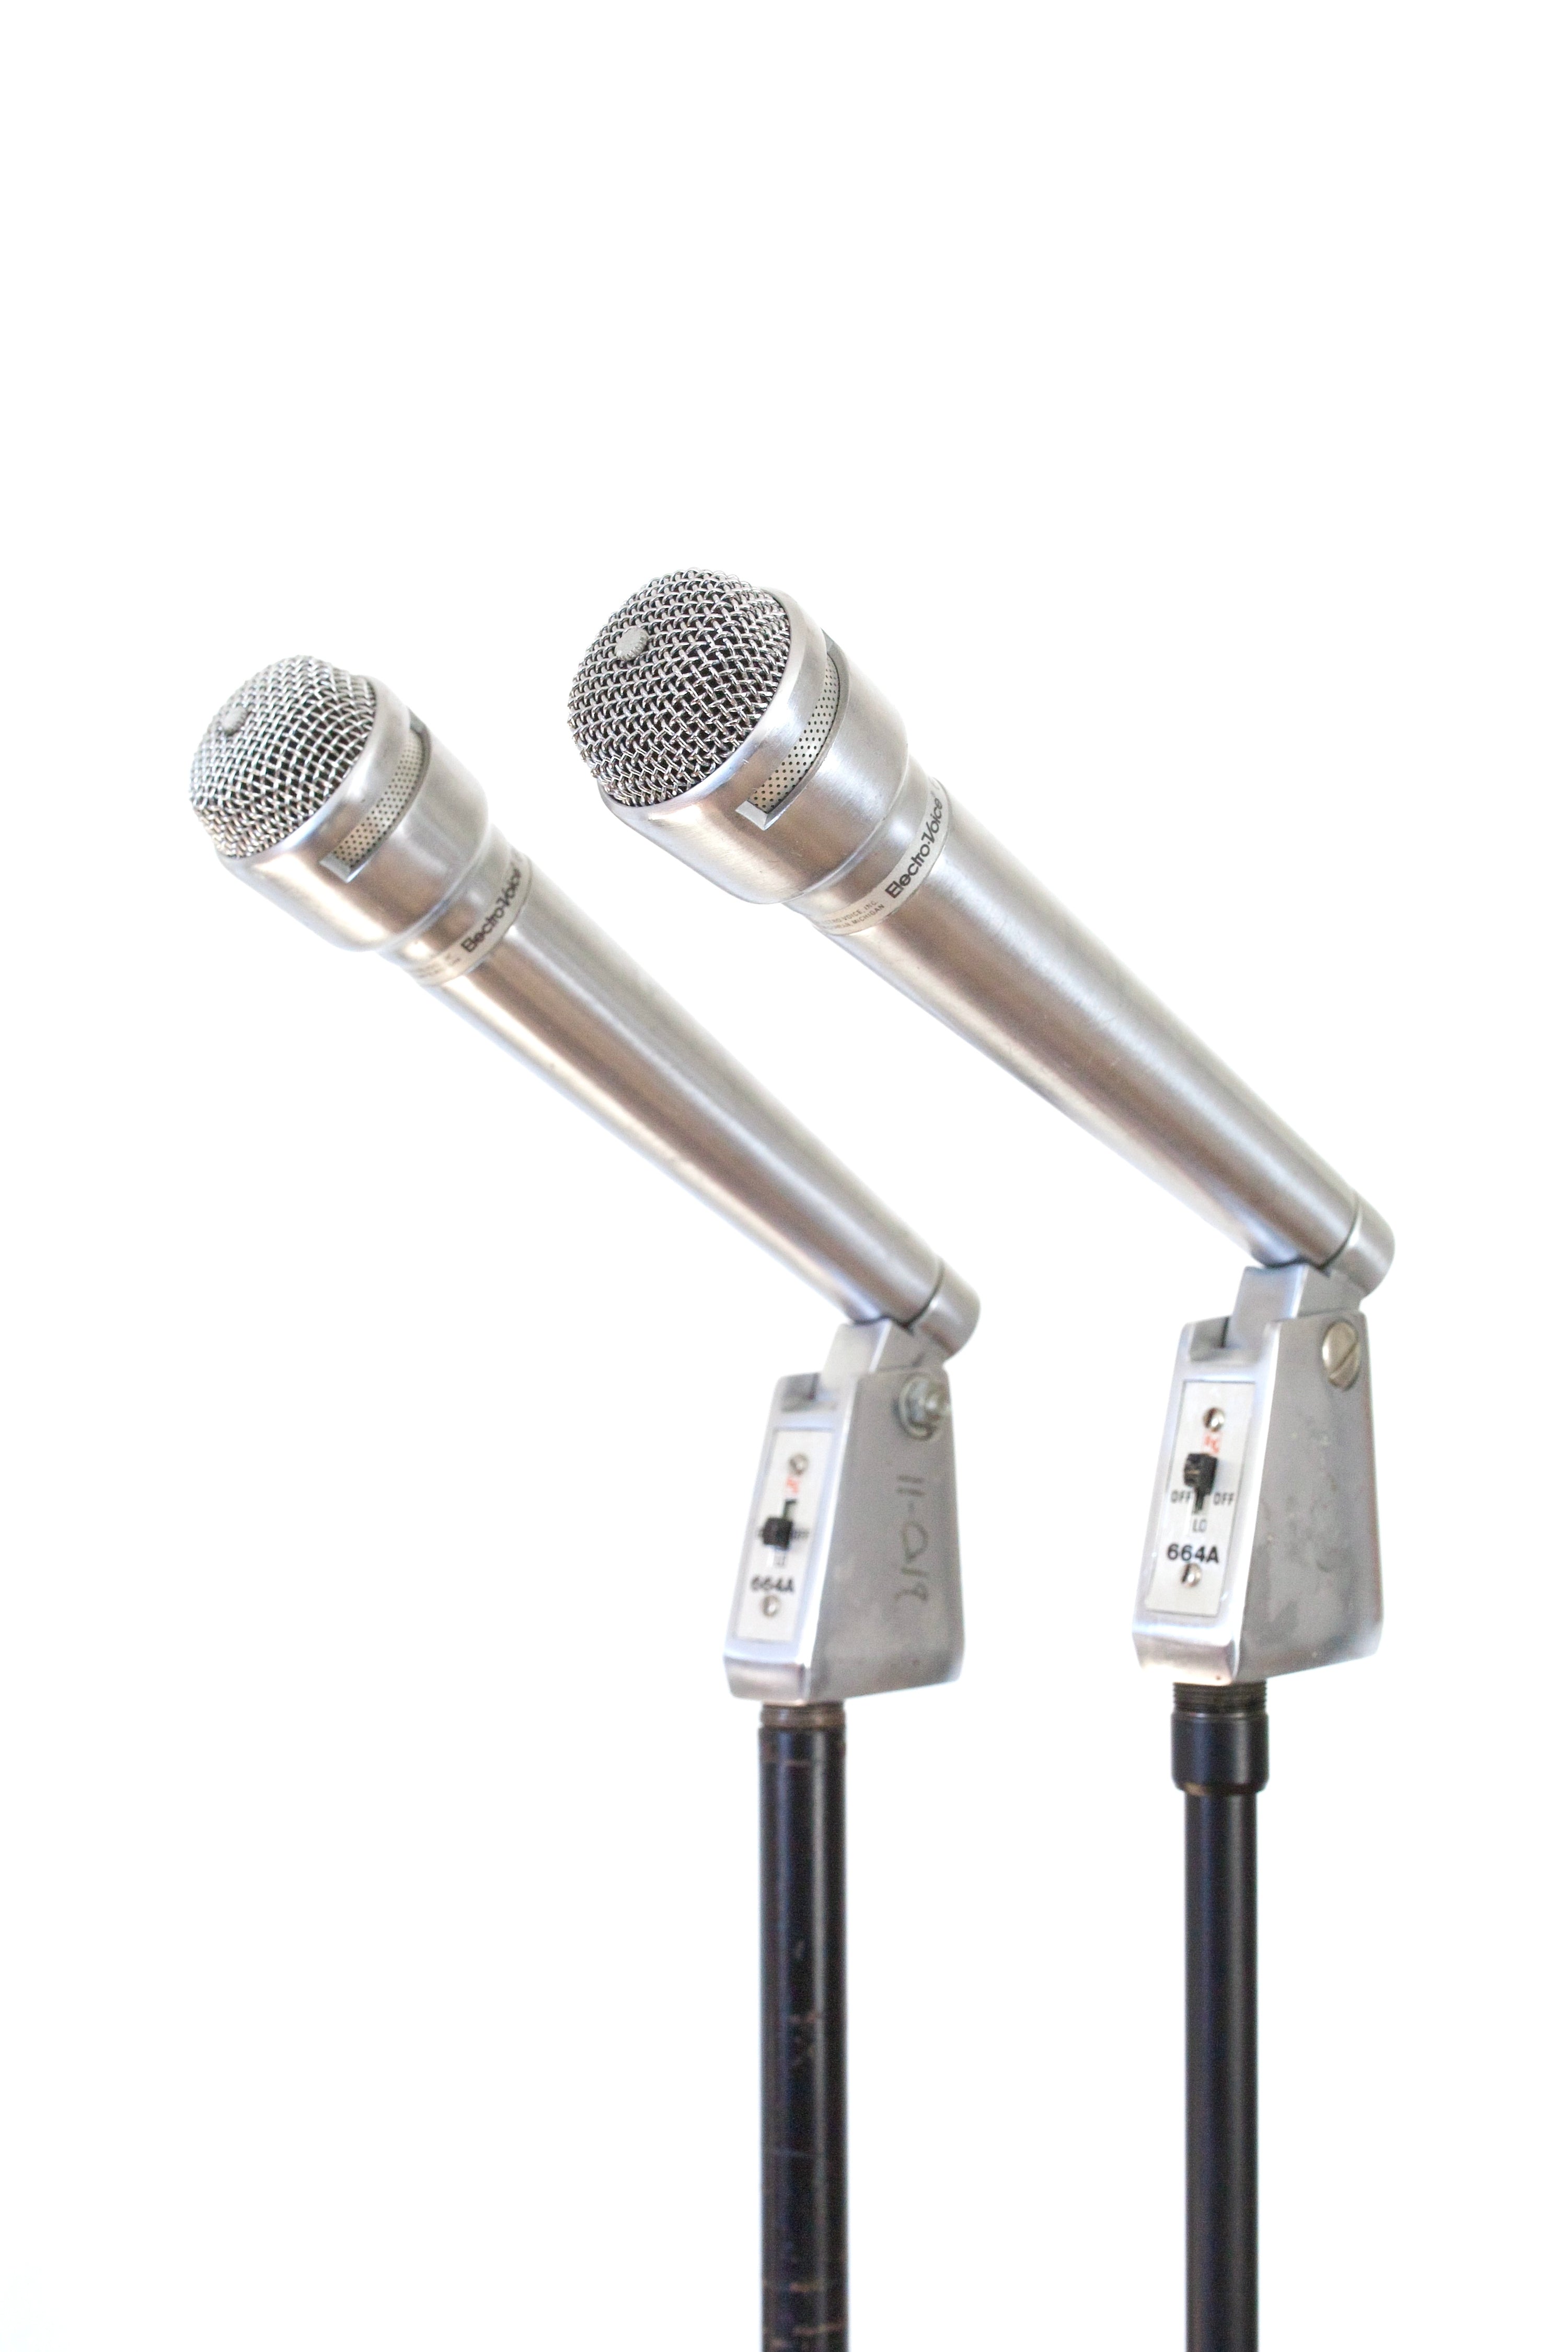 Electro Voice 664A Dynamic Microphone